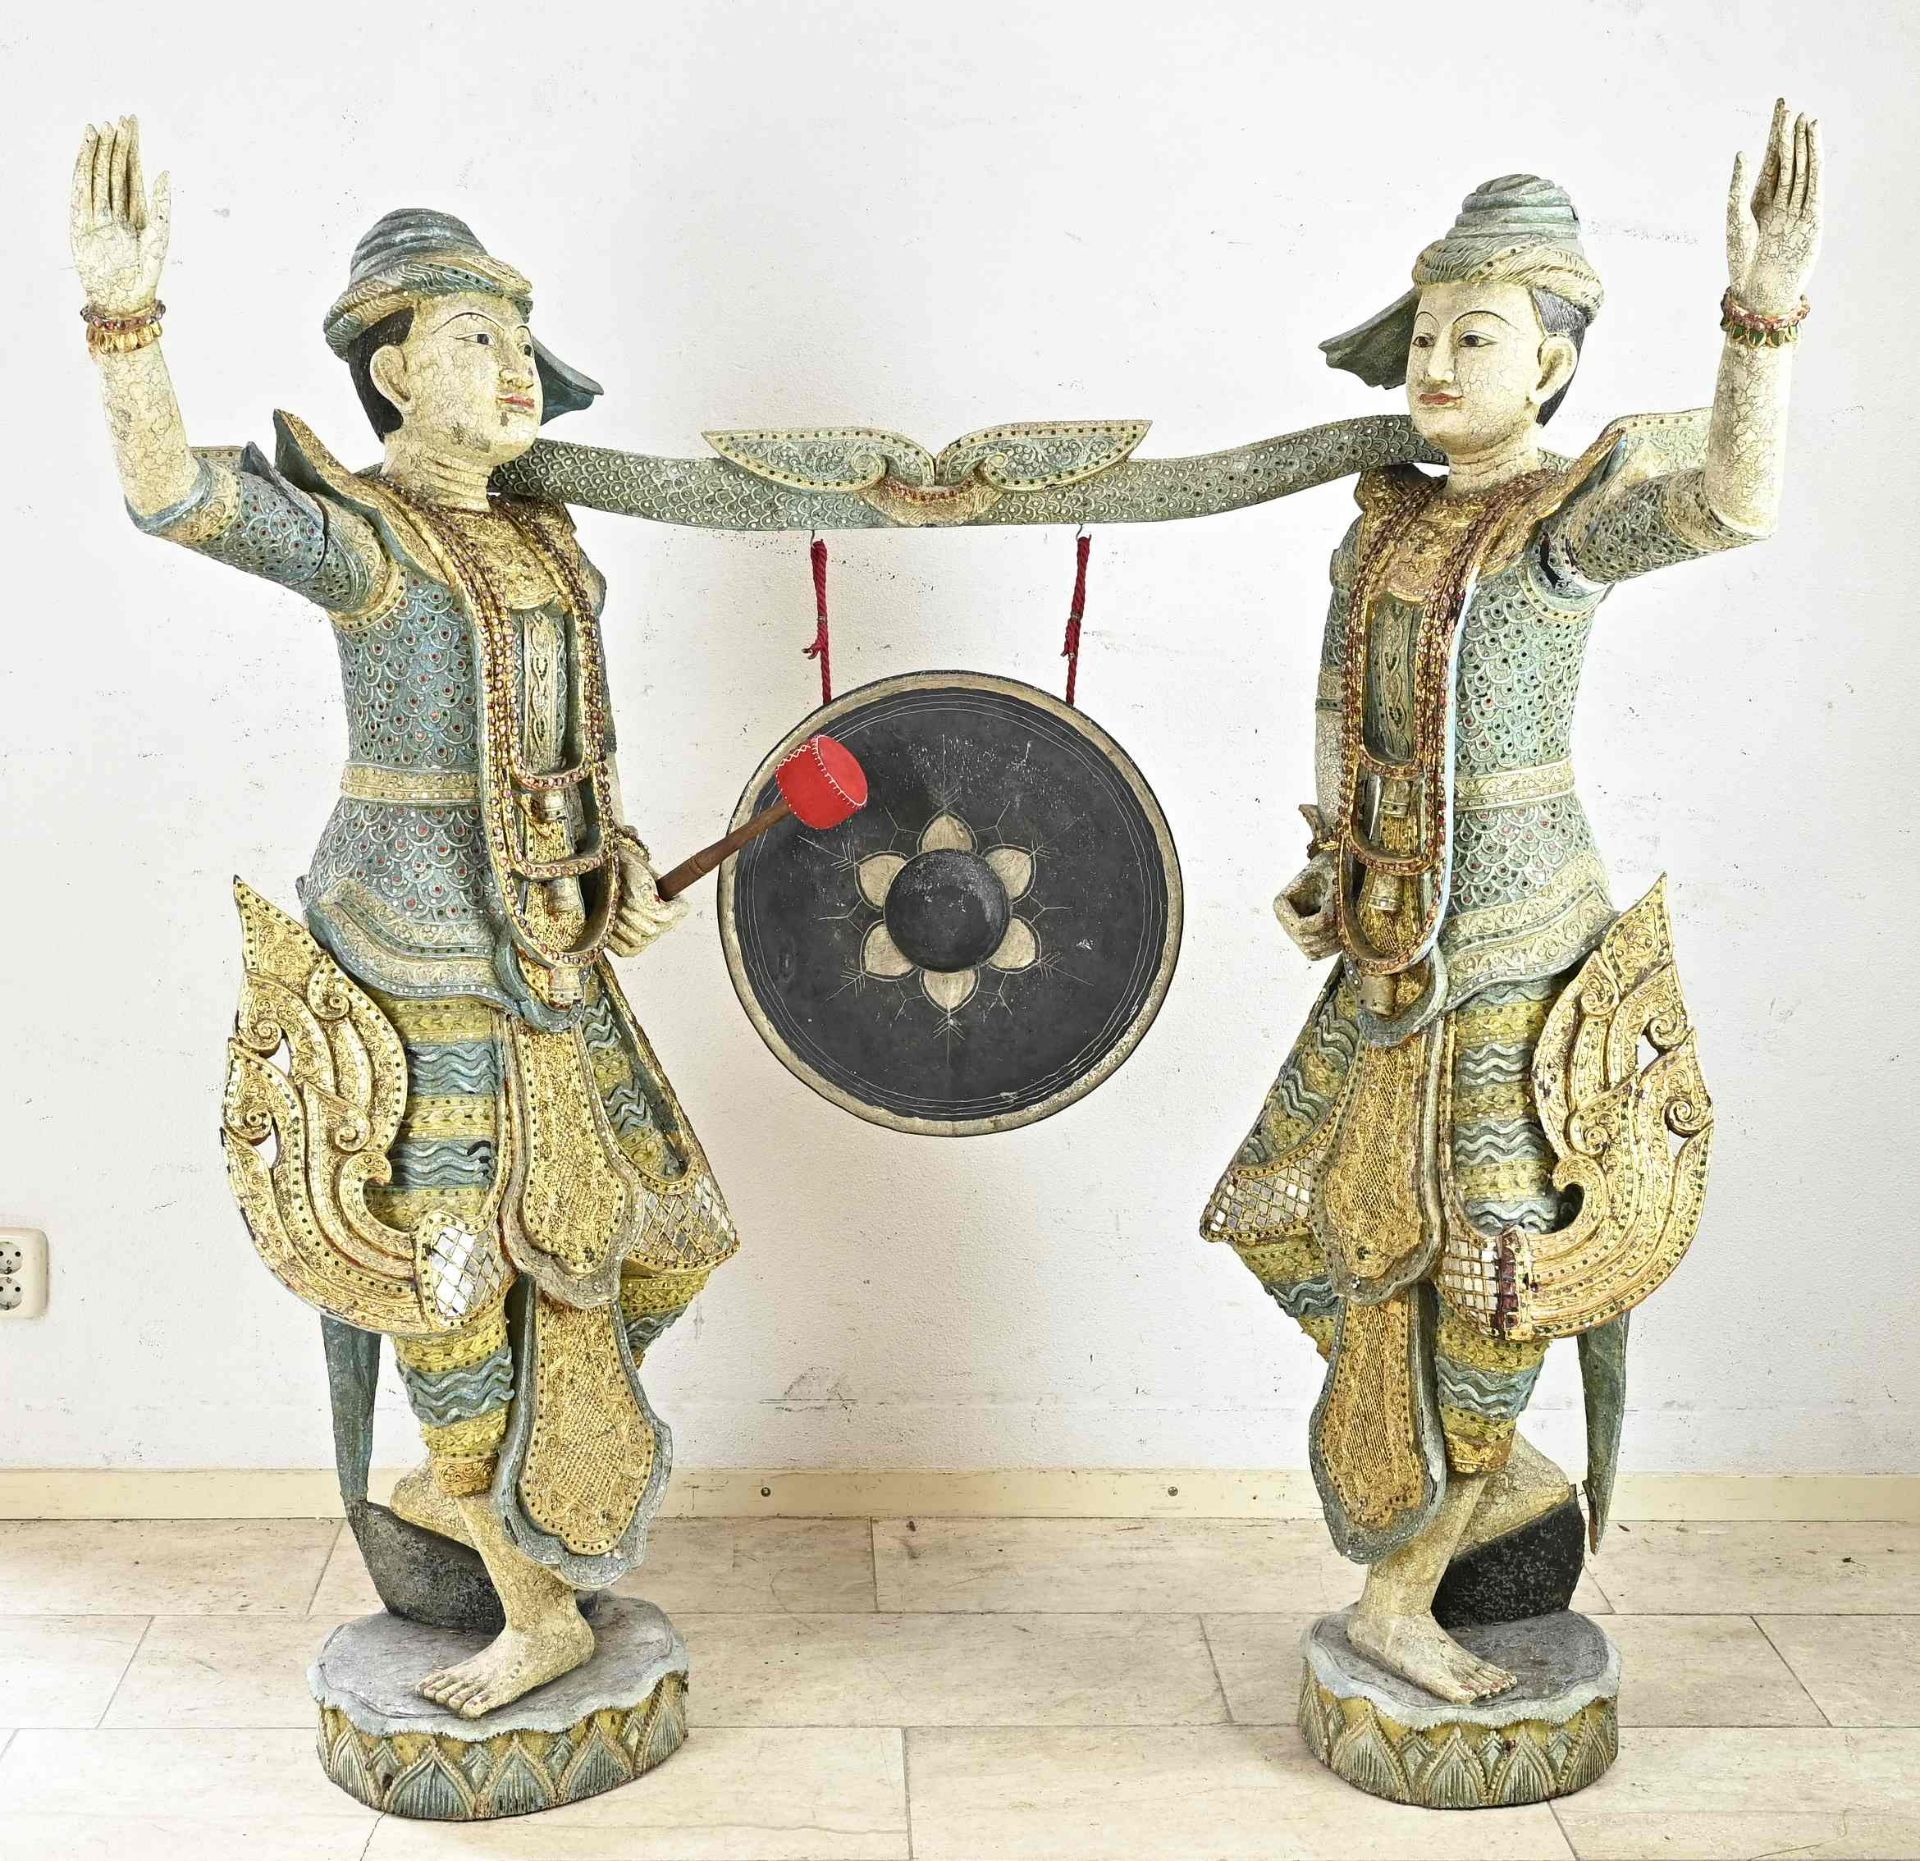 Two life-sized oriental figures